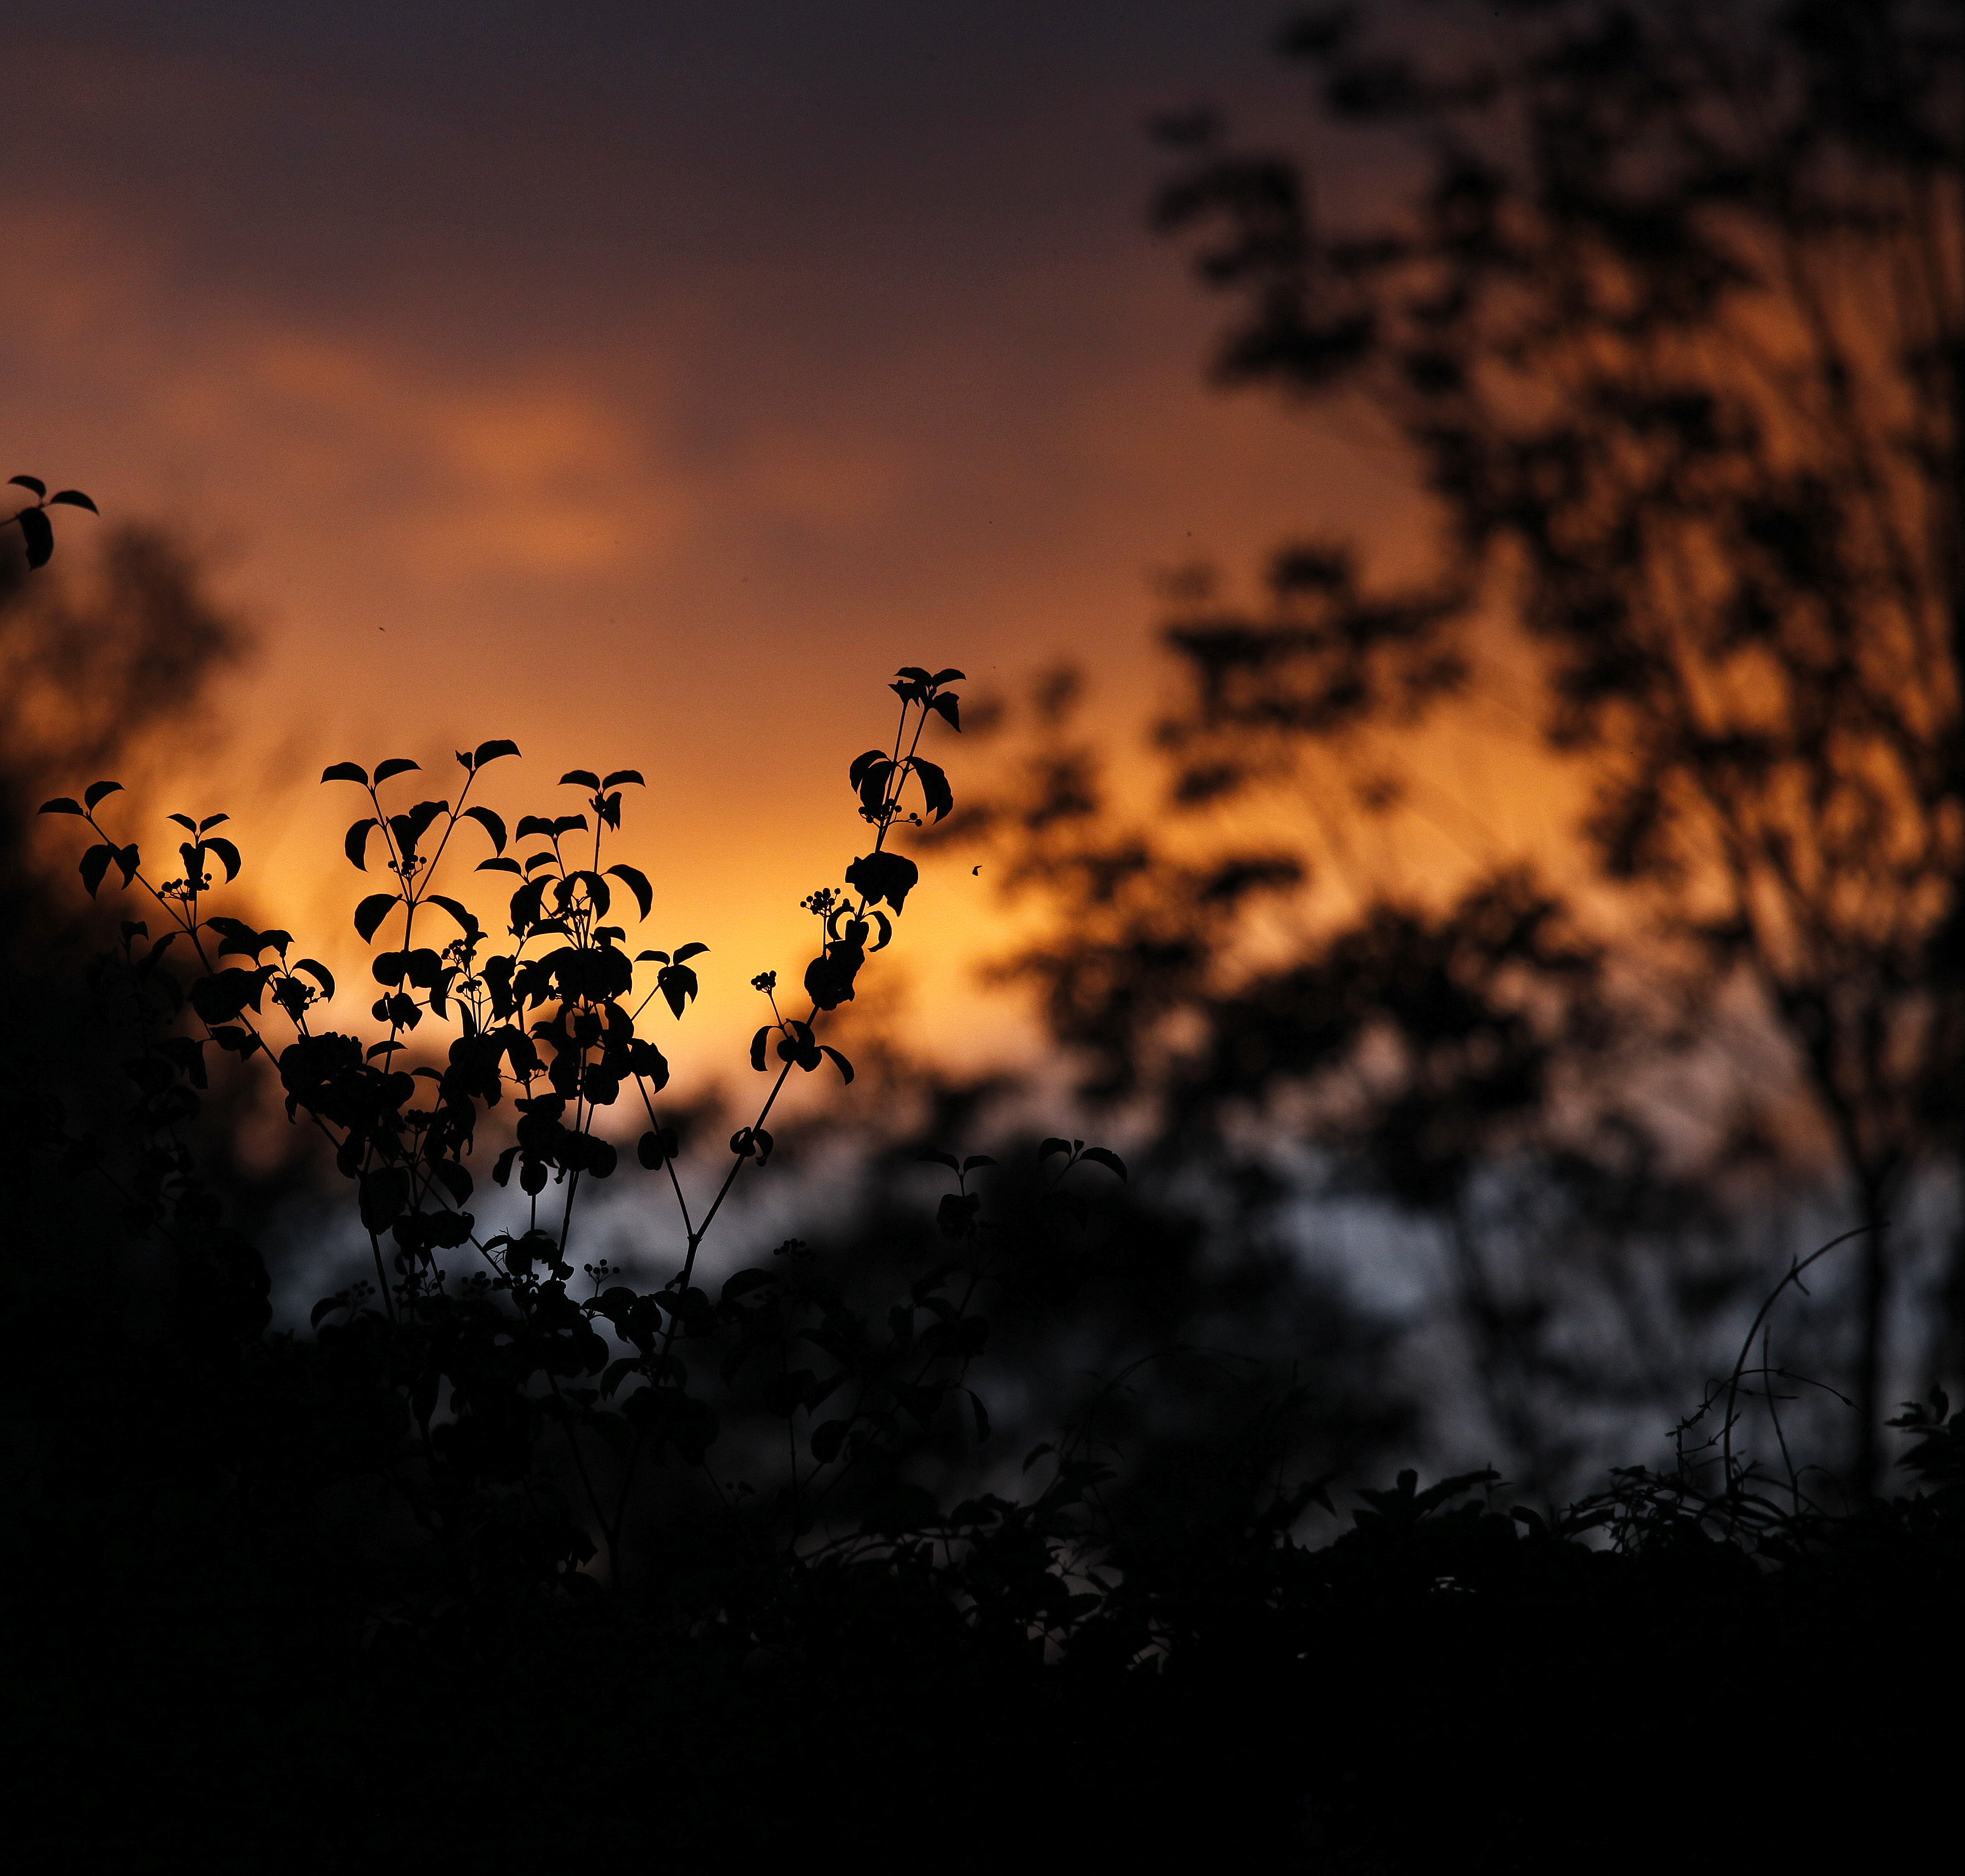 dark, sunset, silhouettes, leaves, outlines, plants cellphone